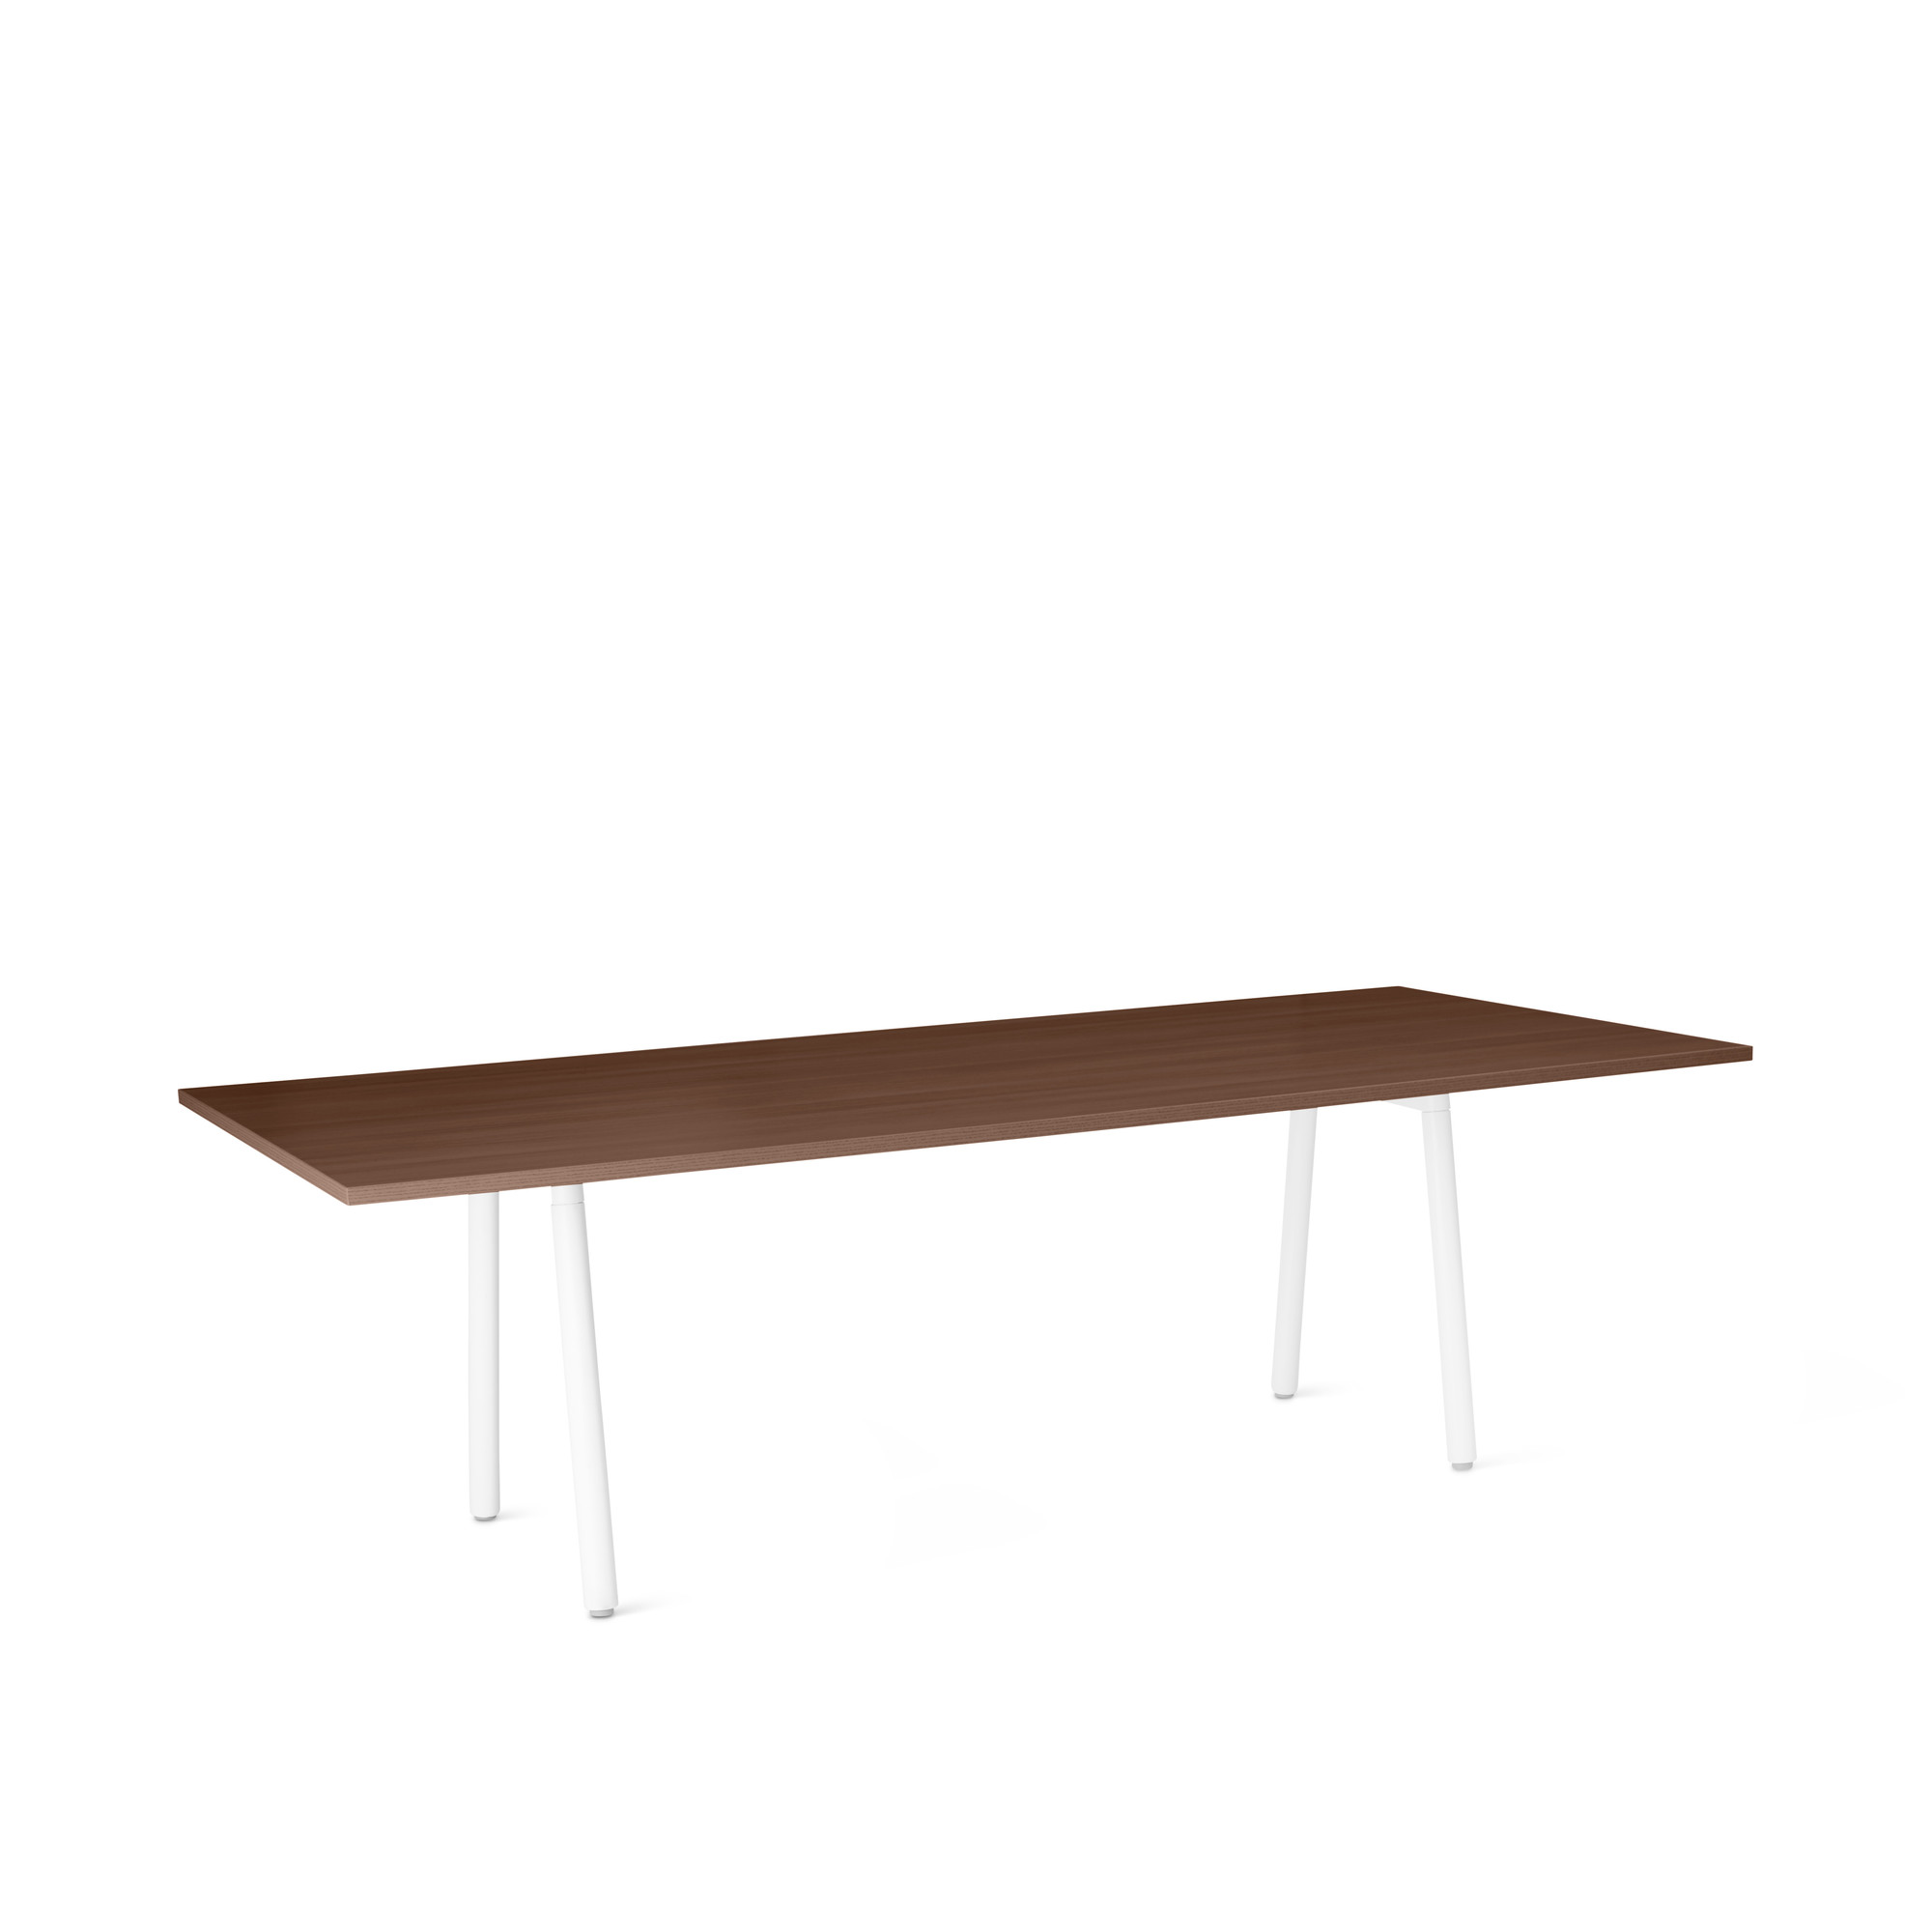 Series A Conference Table, Walnut, 96x42", White Legs,Walnut,hi-res